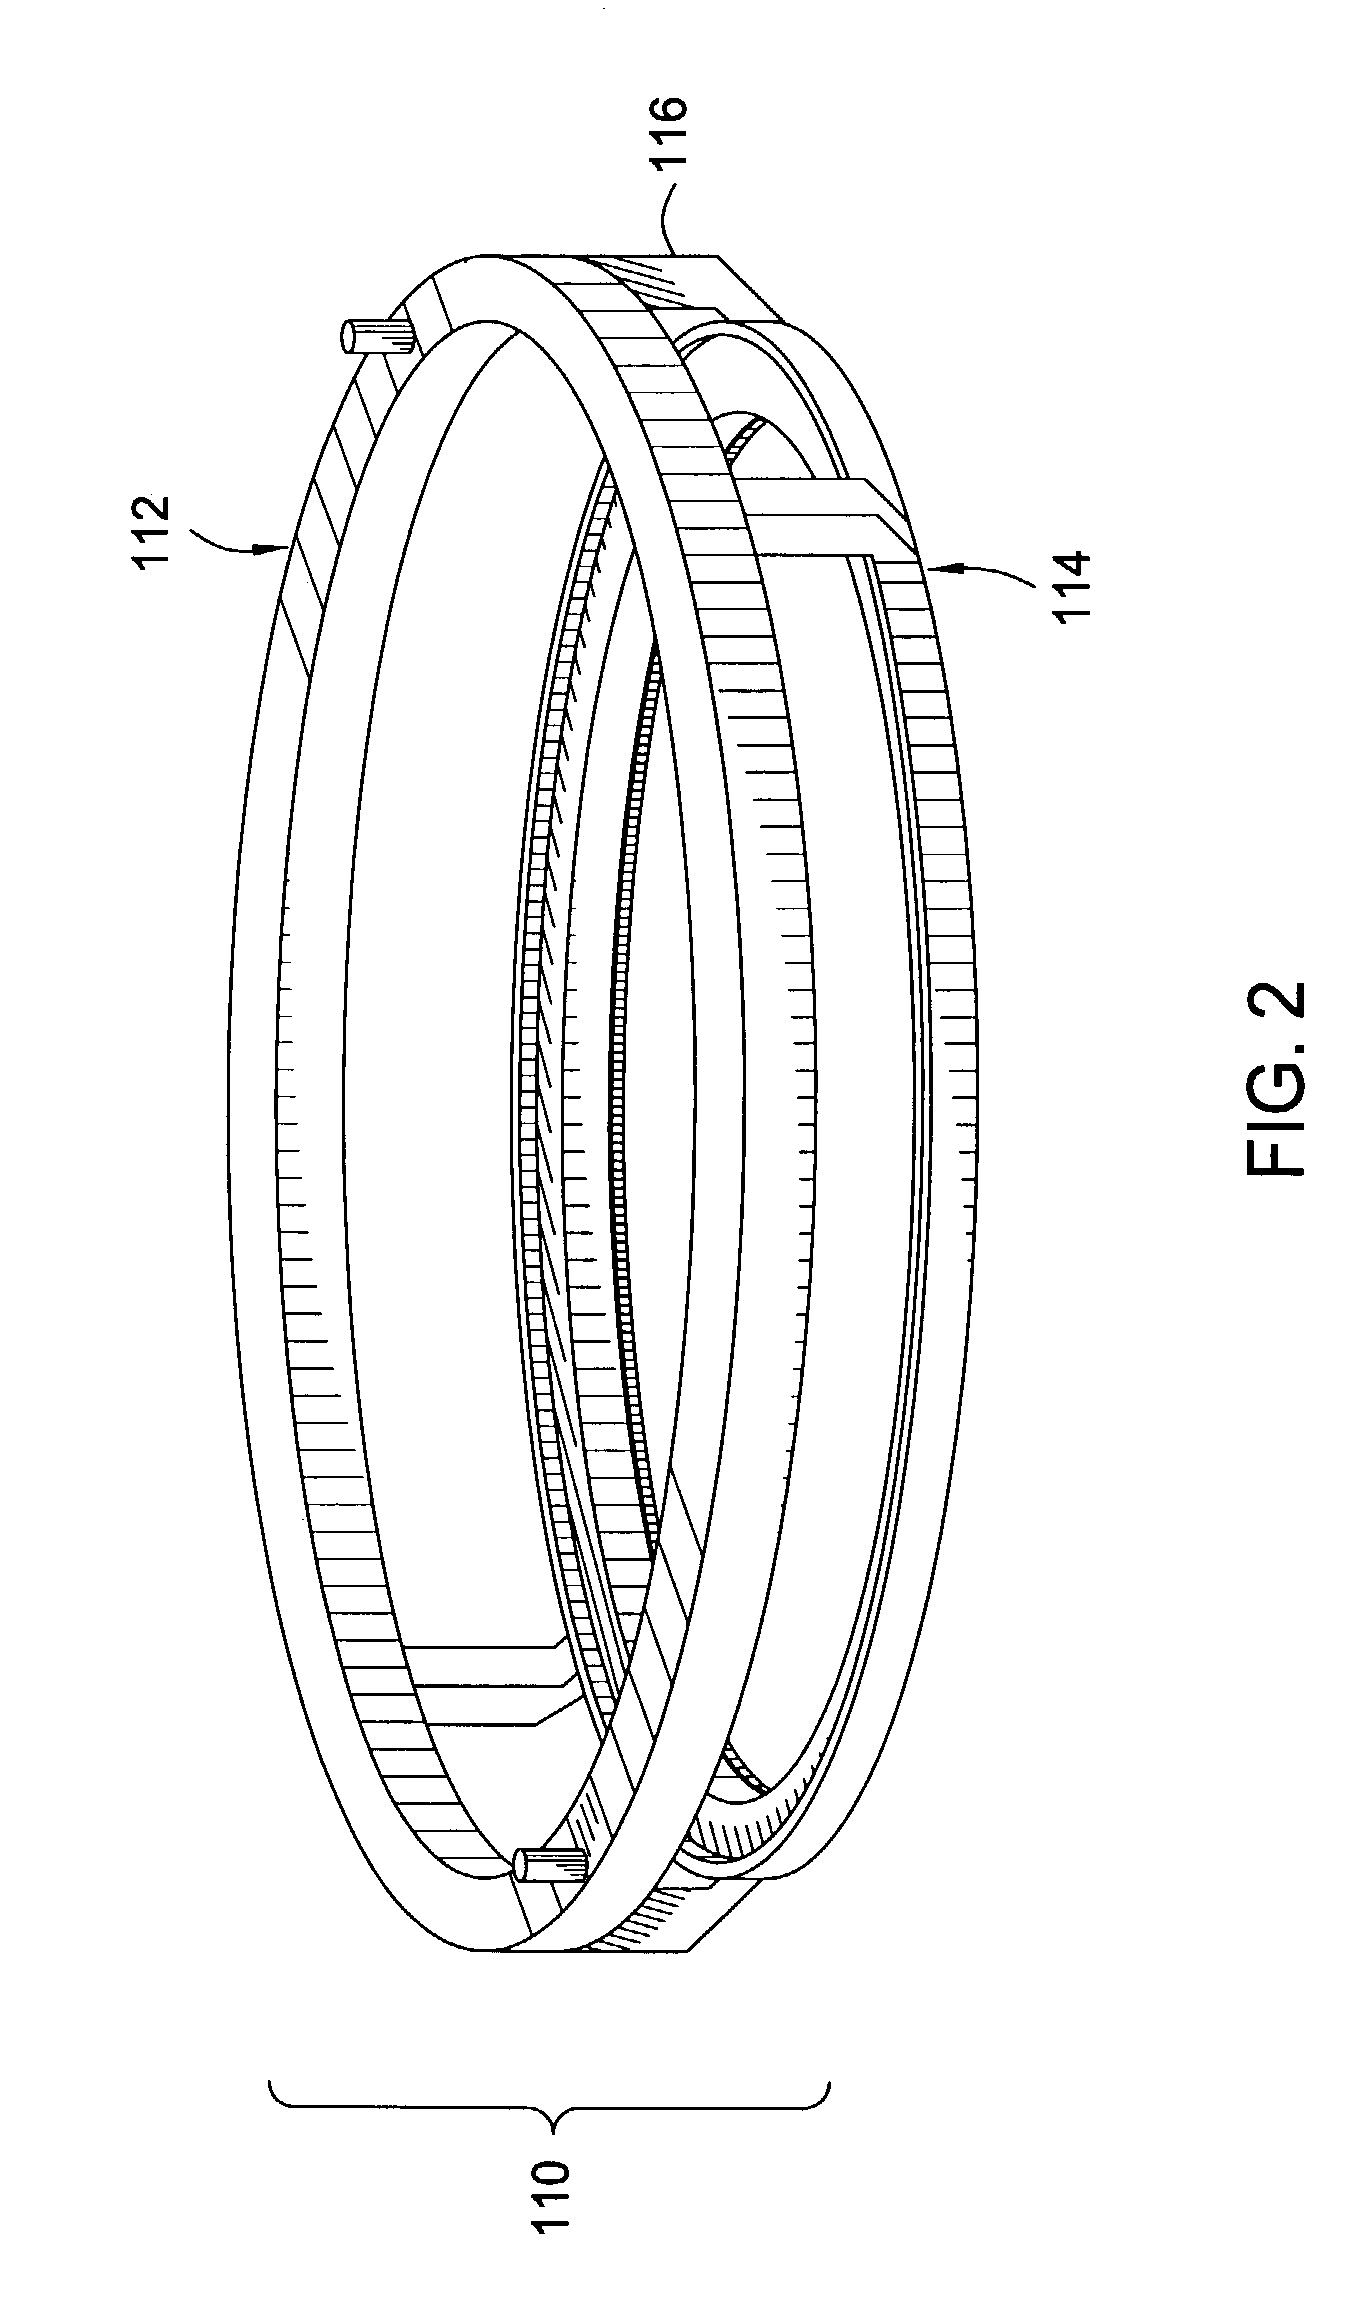 Contact ring with embedded flexible contacts